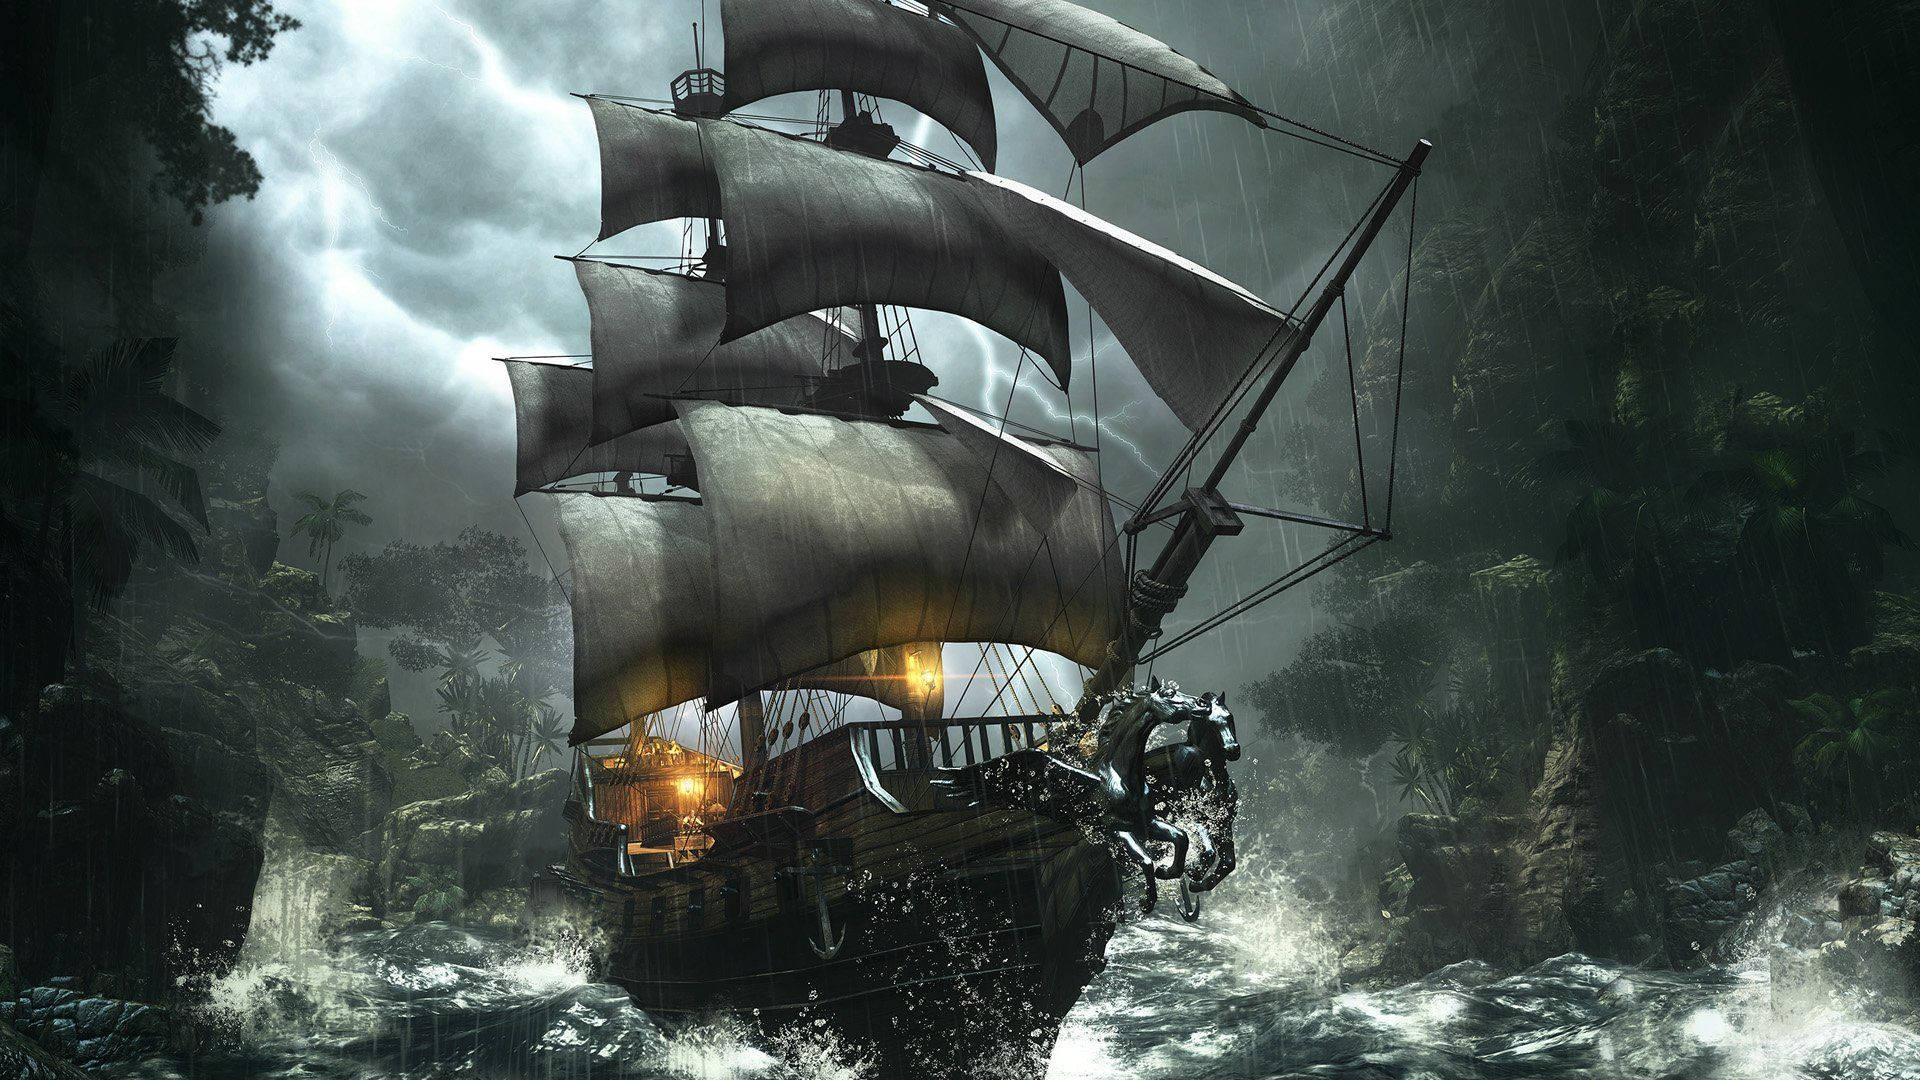 The pirate ship sails through the stormy sea. - Pirate